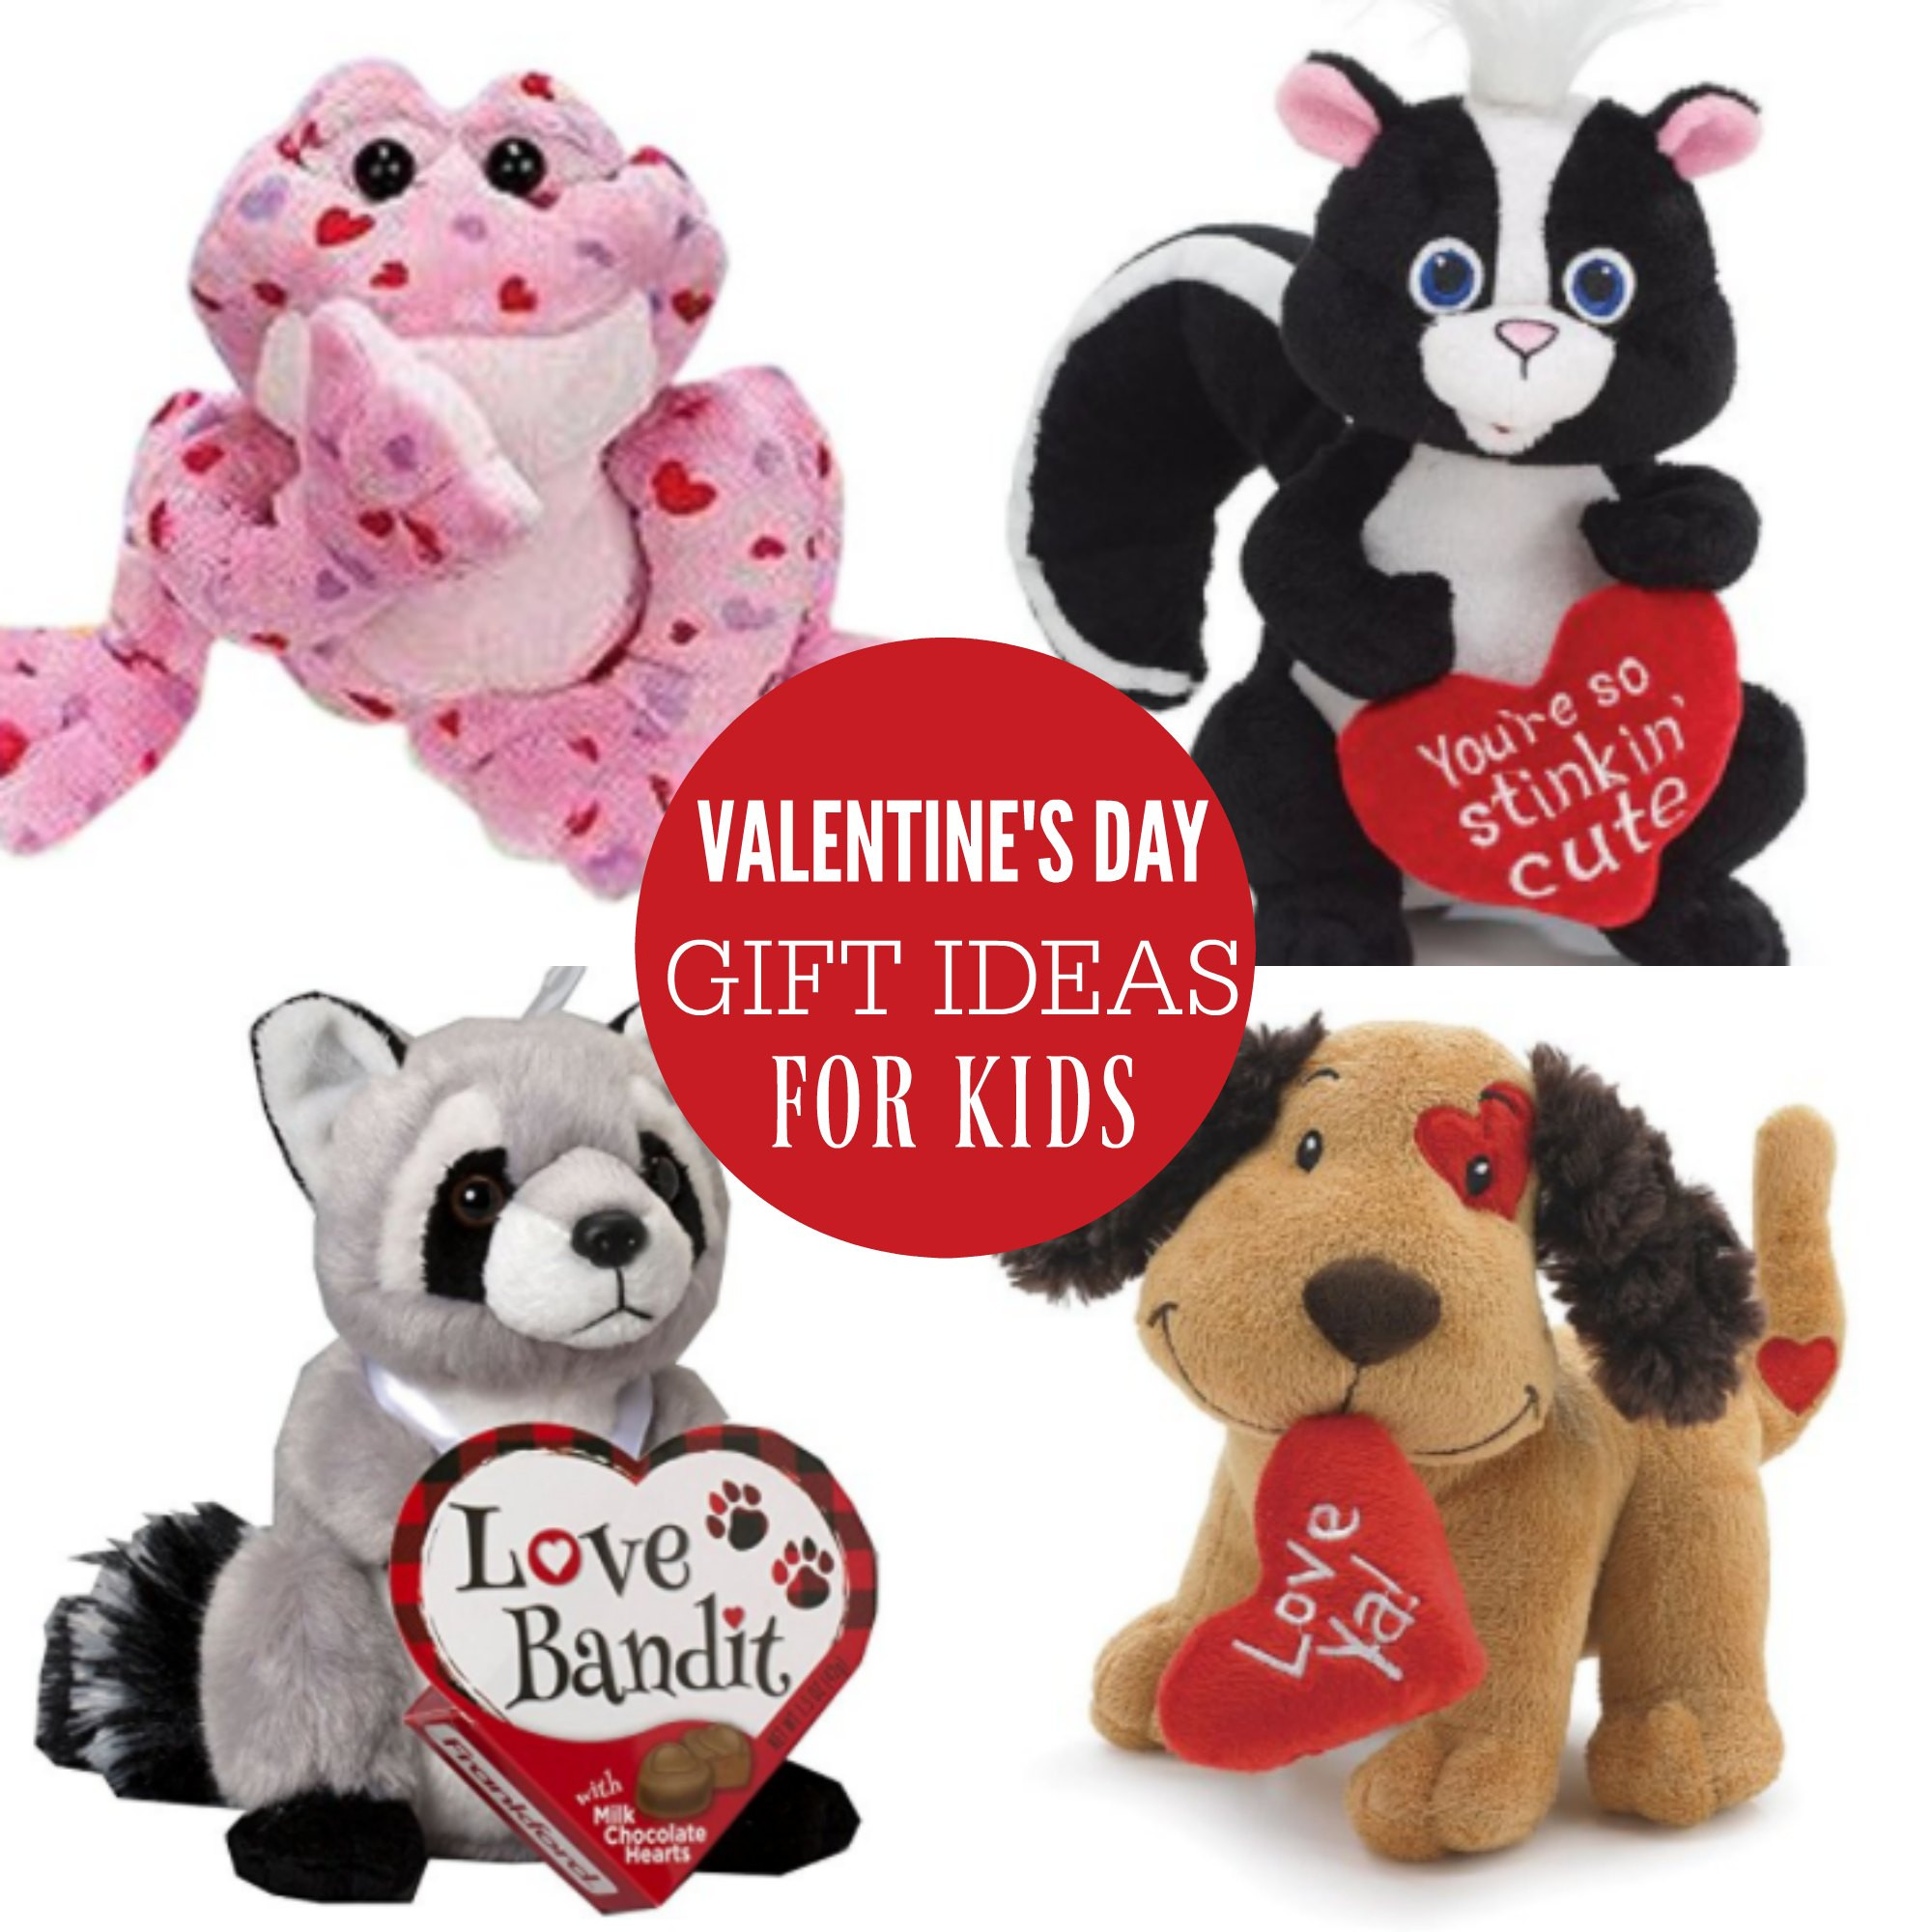 Toddler Valentine Gift Ideas
 Valentine Gift ideas for Kids That they will love